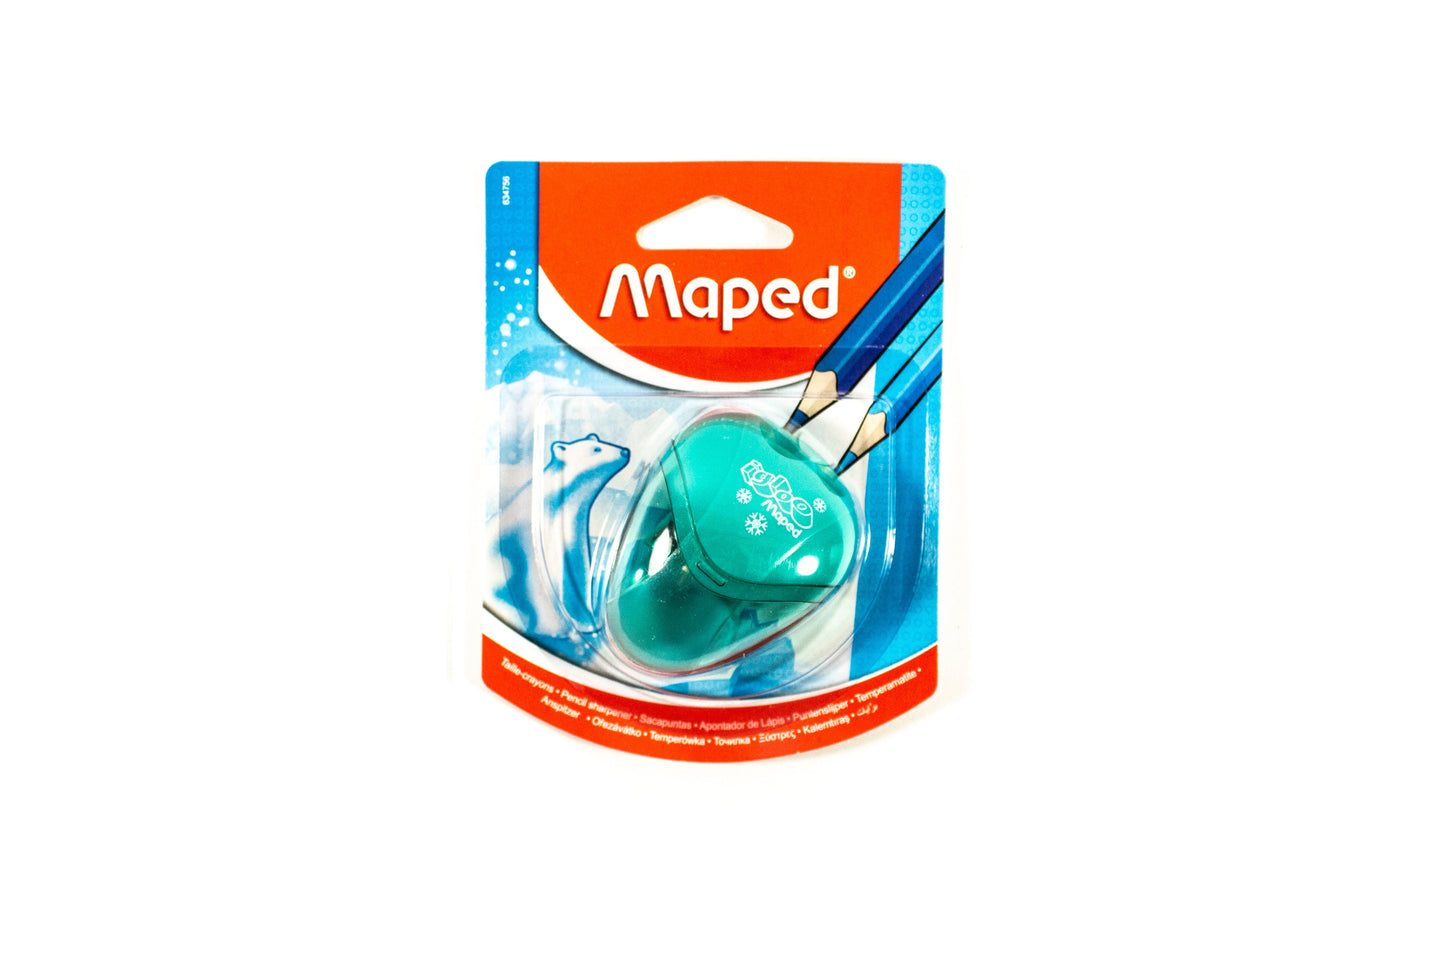 Maped Igloo Sharpener 2 Holes 634756 | Sold by 5s